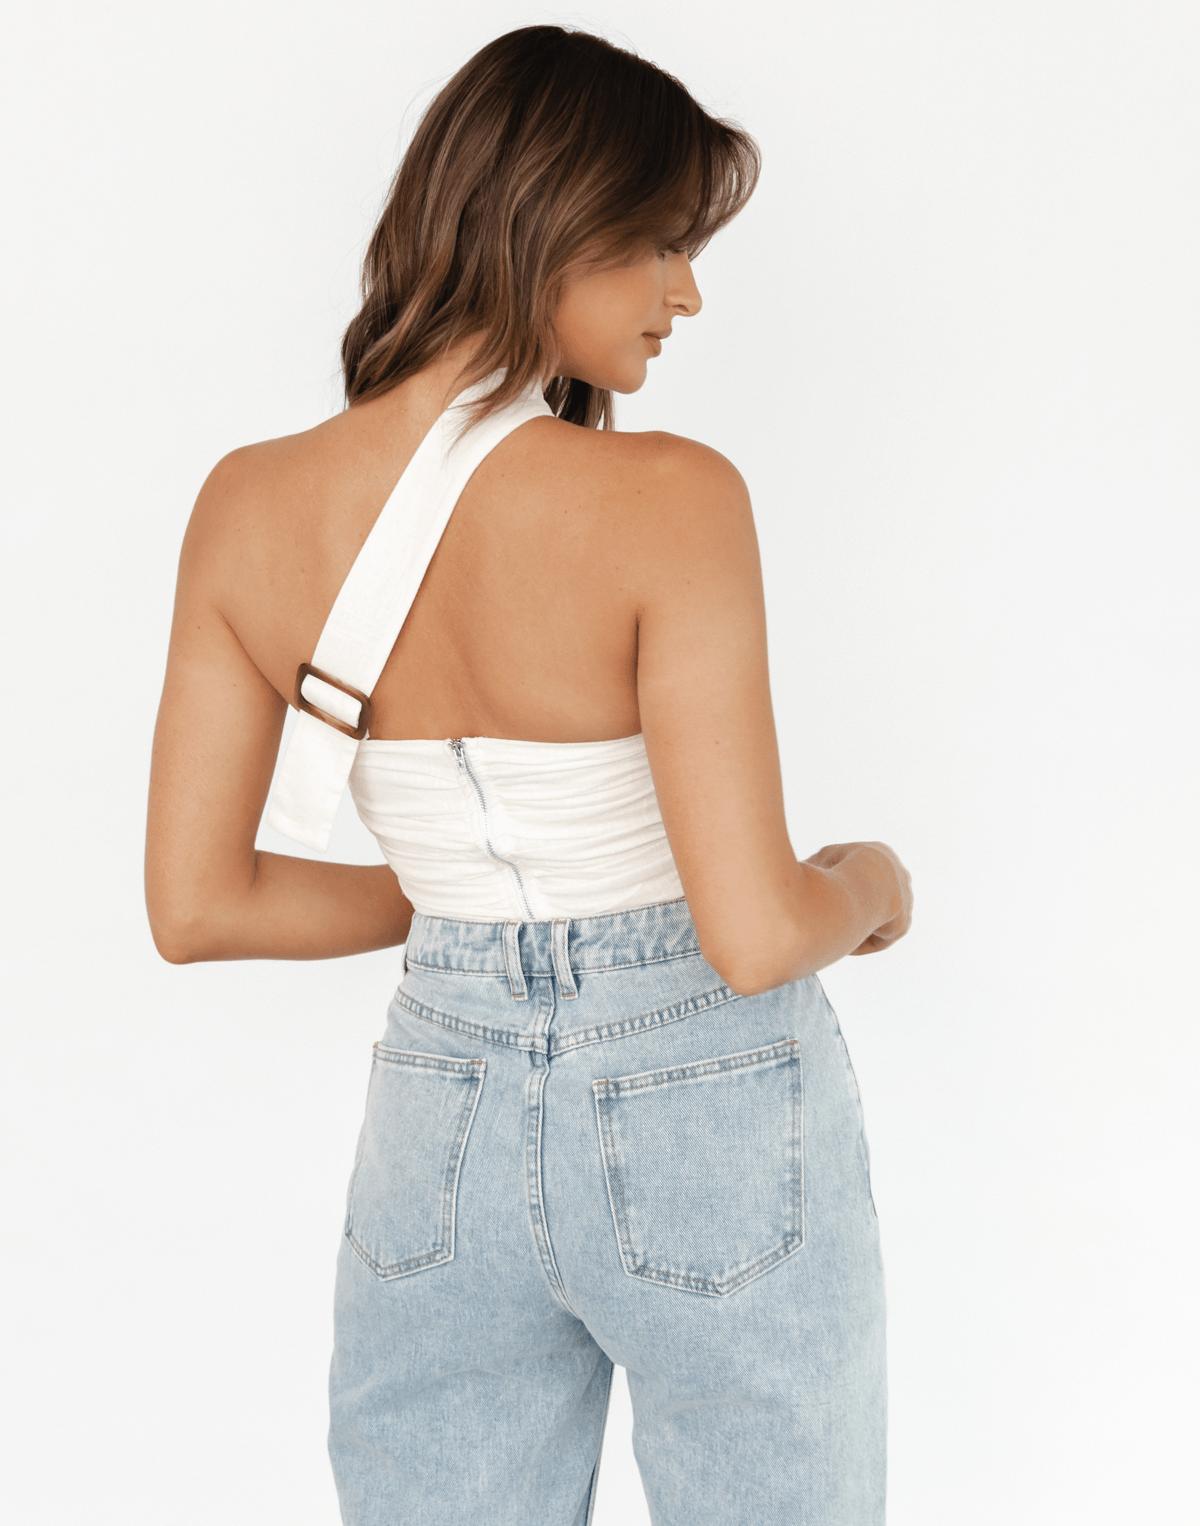 Alani Top (White) - White Gathered Crop Top - Women's Top - Charcoal Clothing